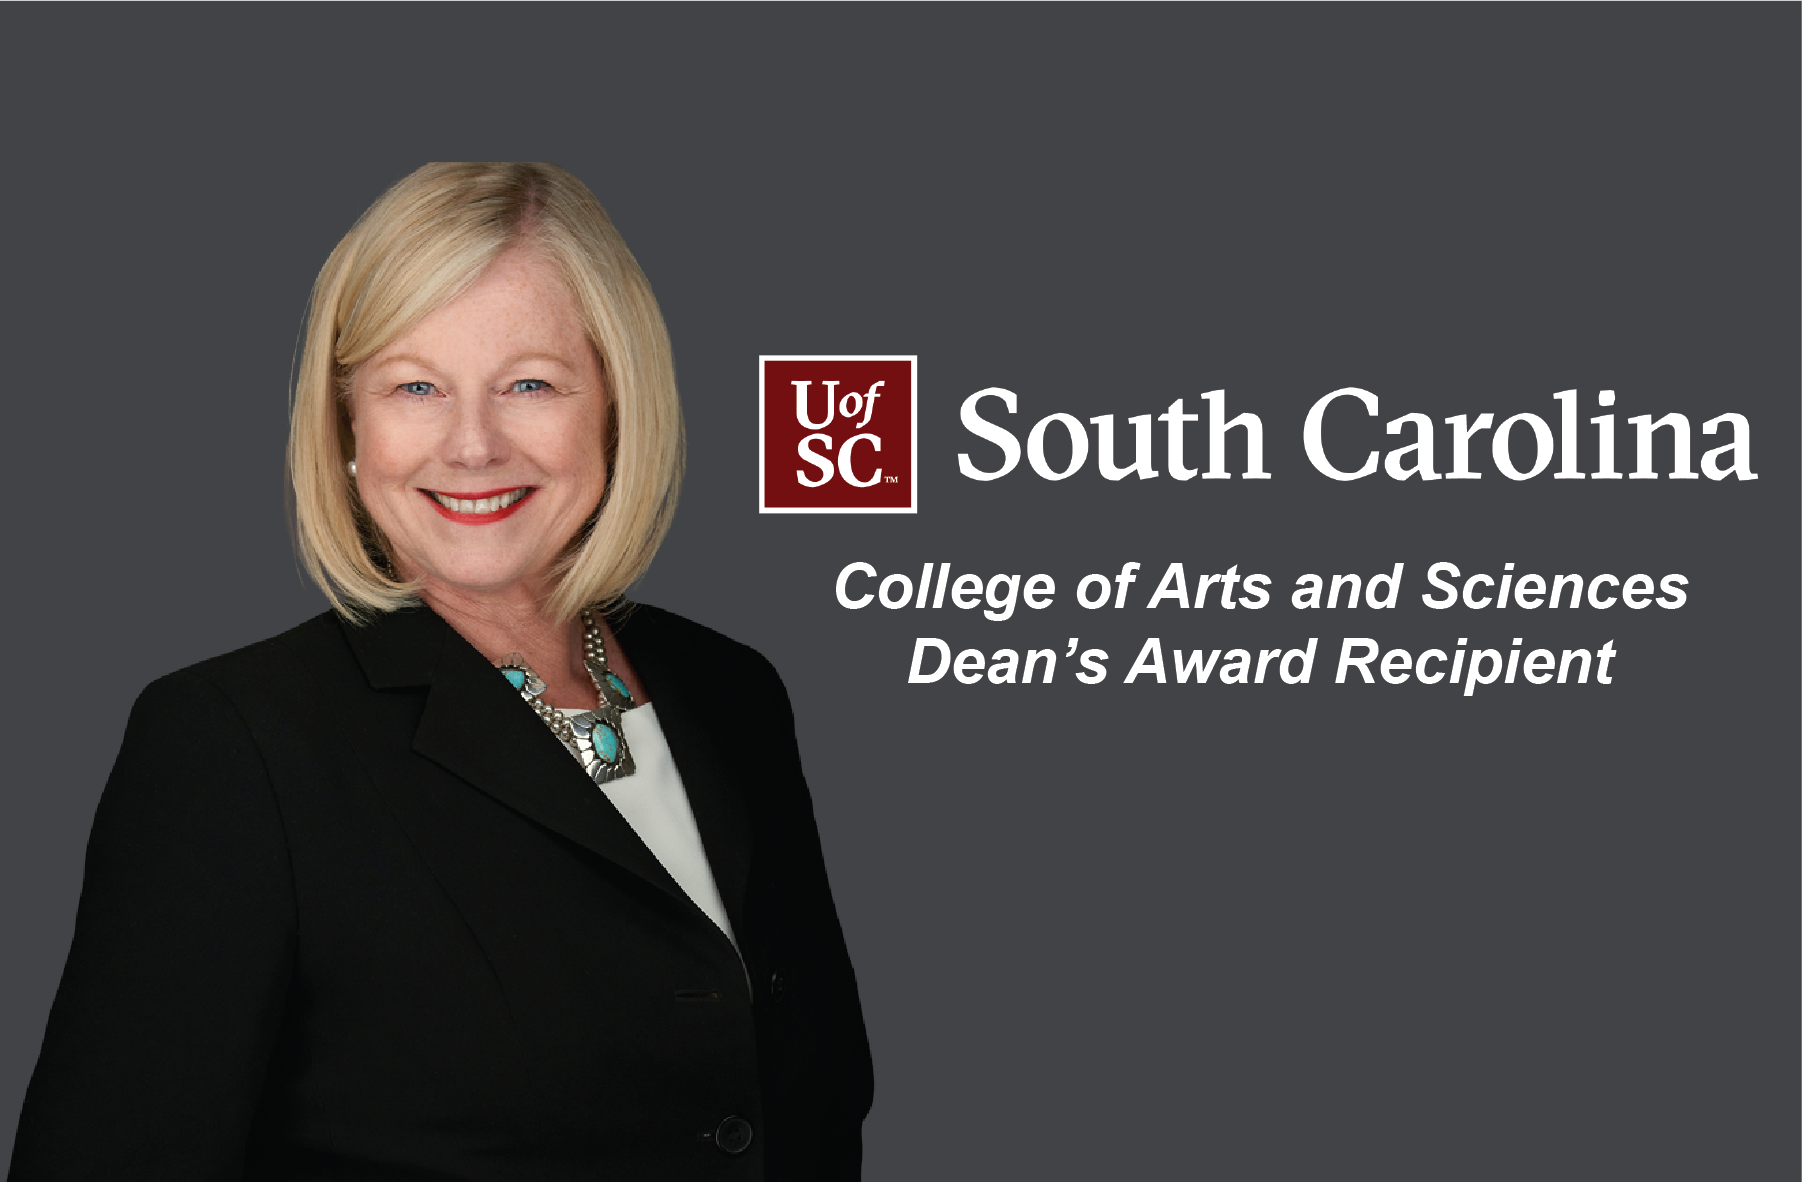 Karen Randall UofSC College of Arts and Sciences Dean's Award